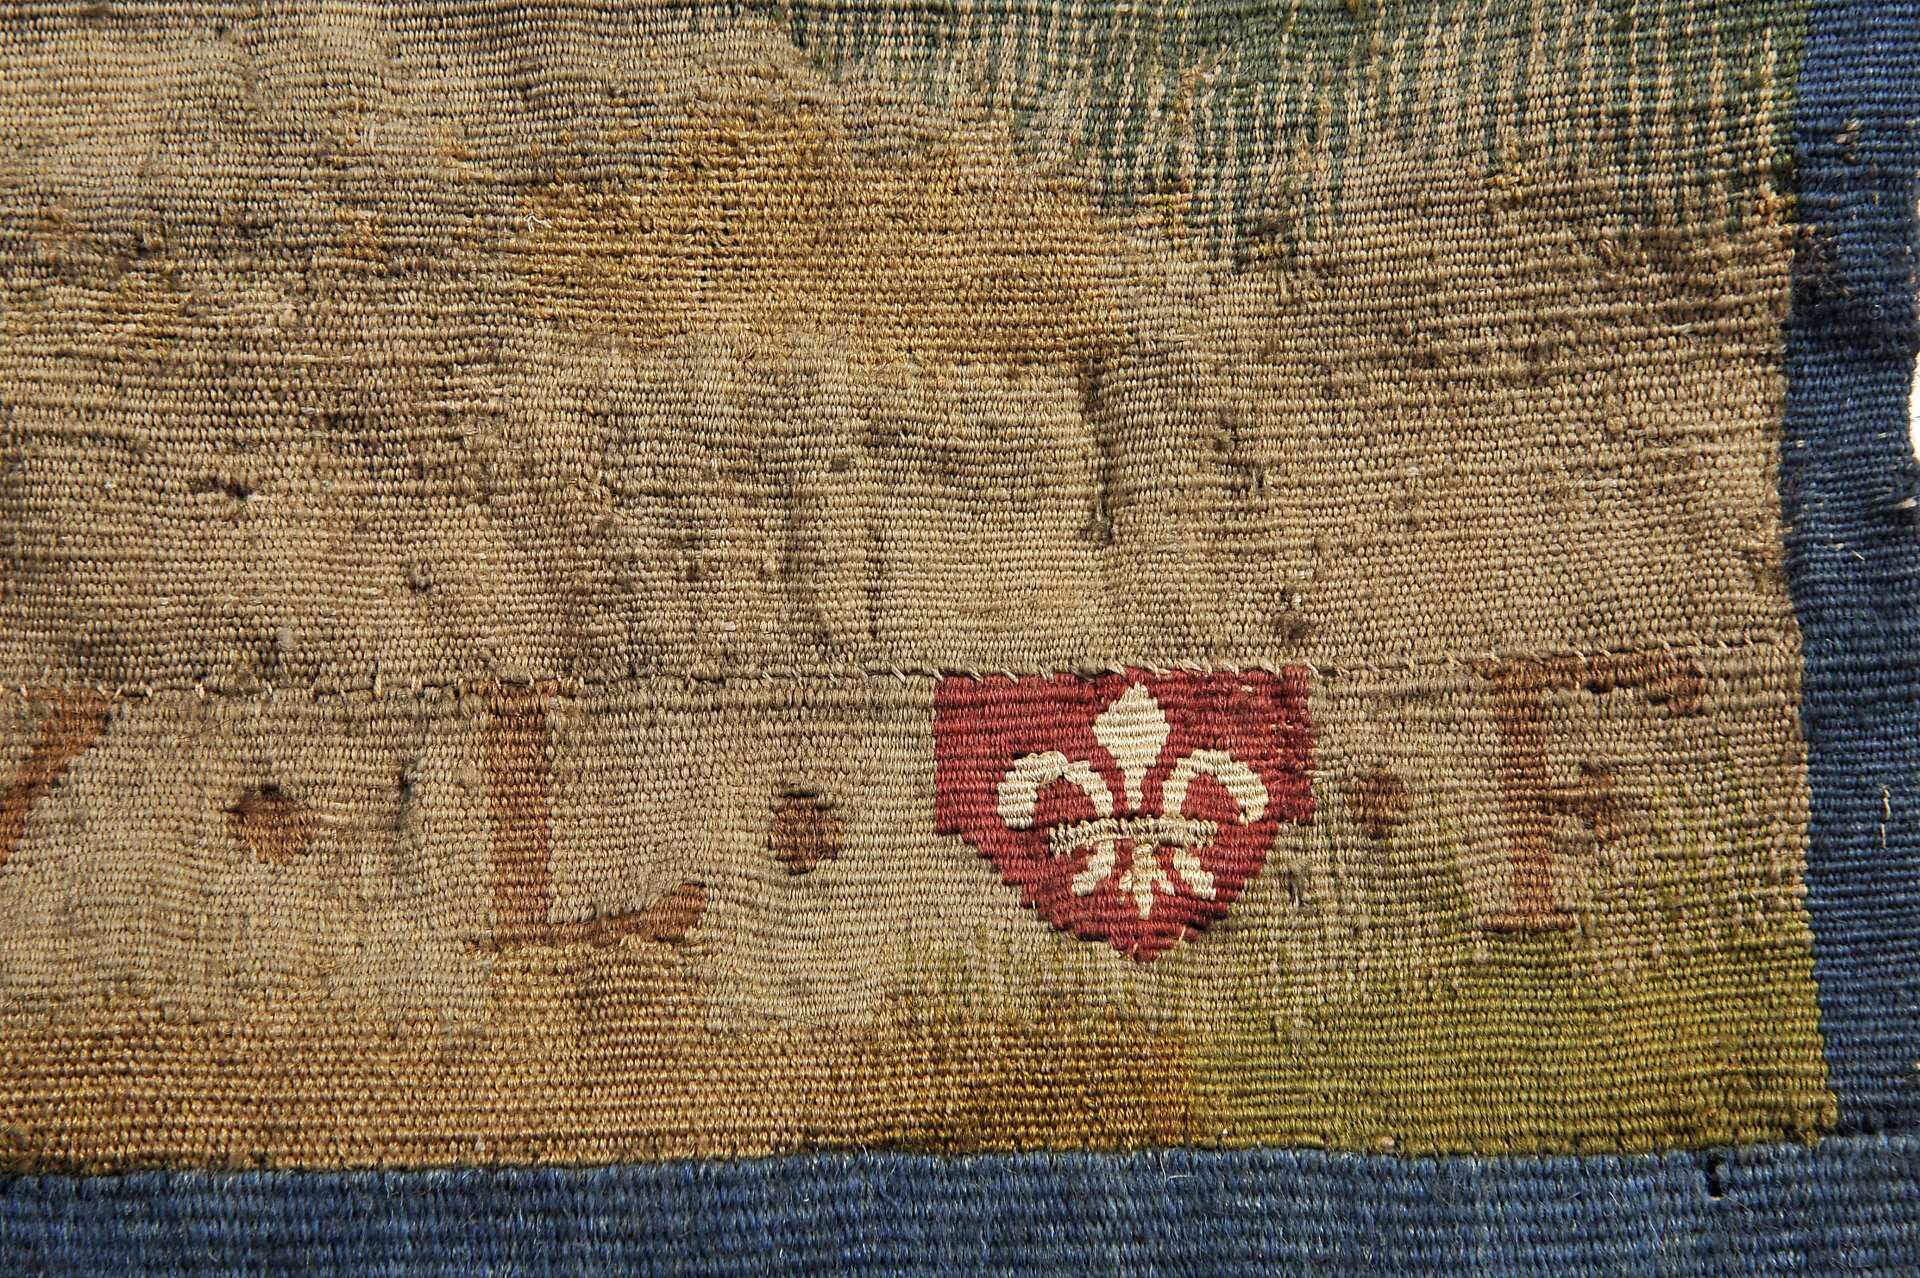 A Lille tapestry - Image 7 of 8